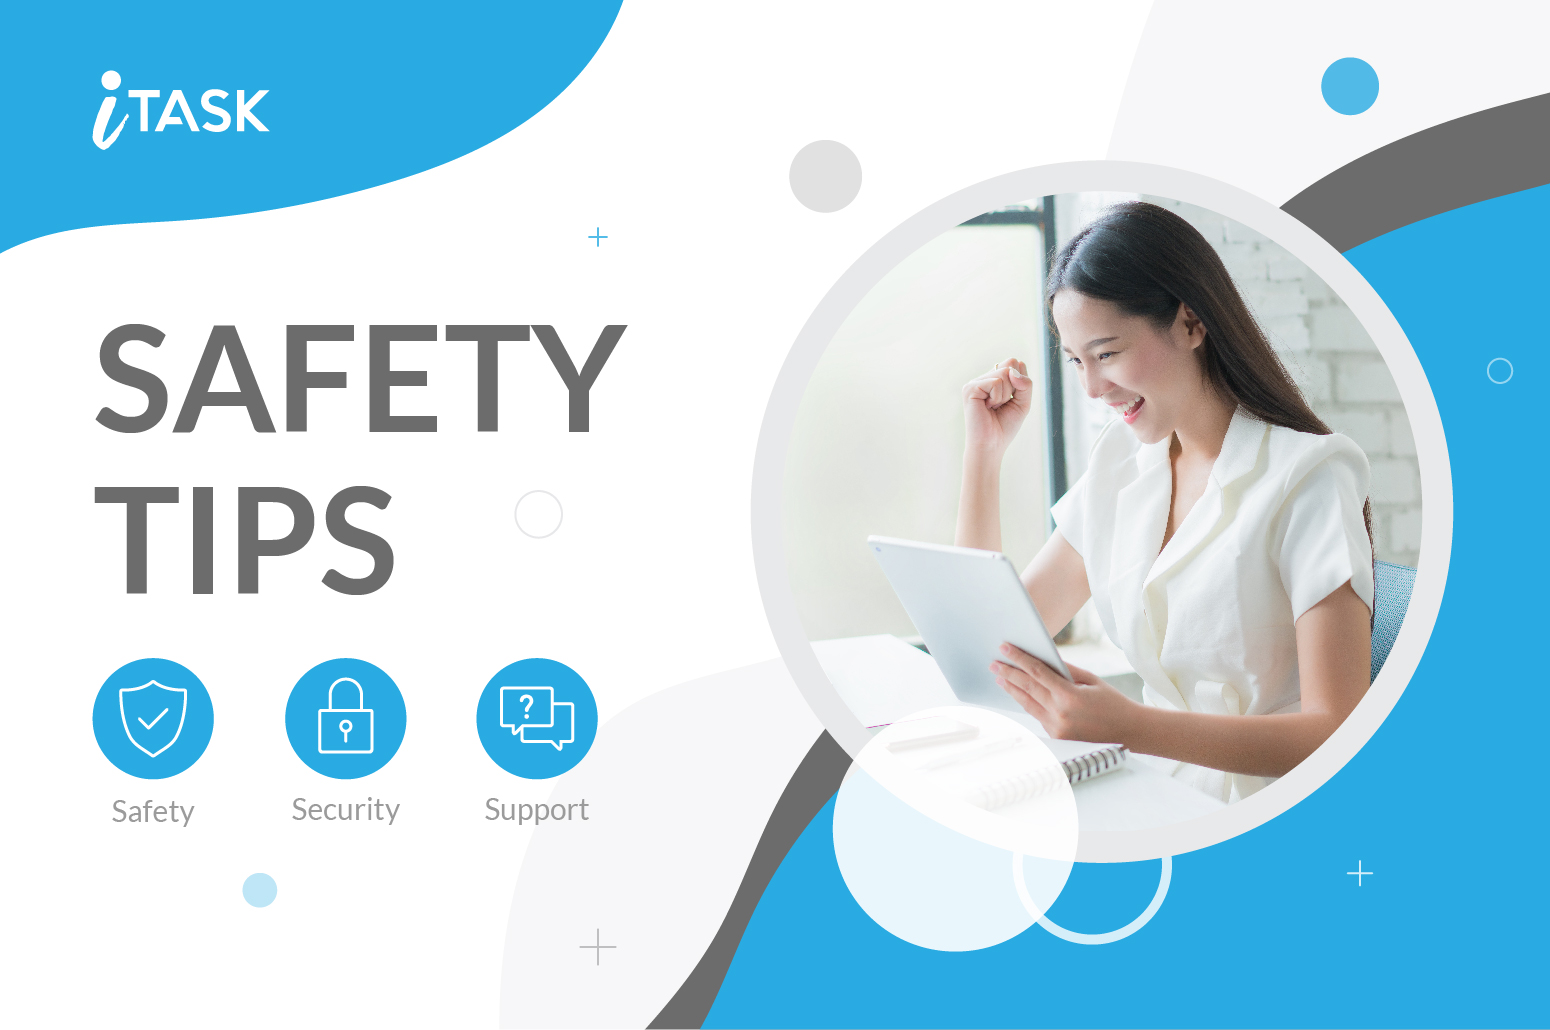 Safety, Security and Support